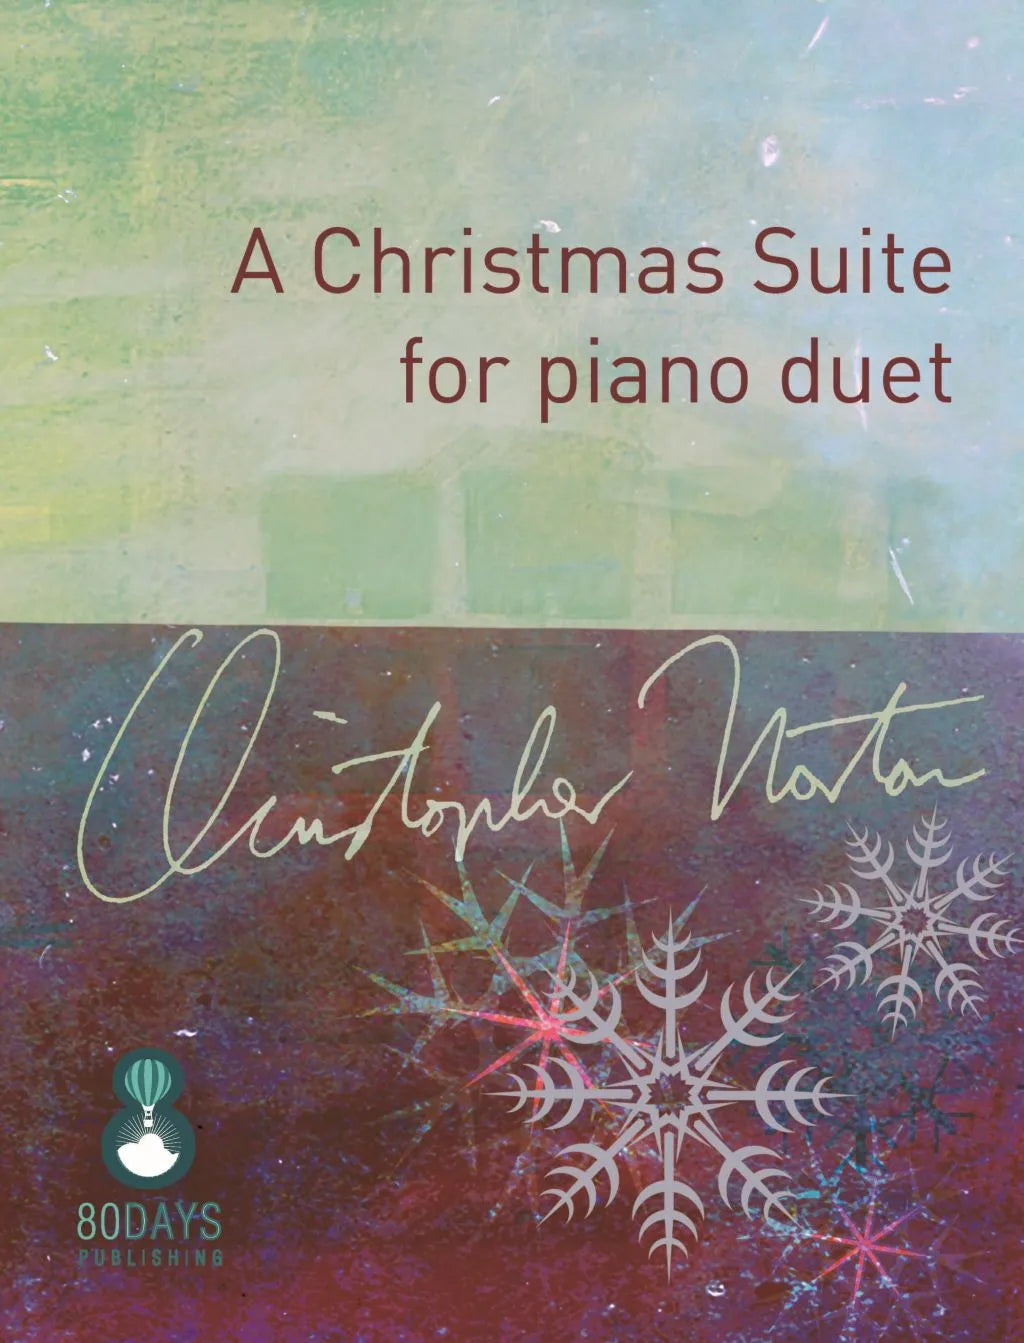 A Christmas Suite for Piano Duet